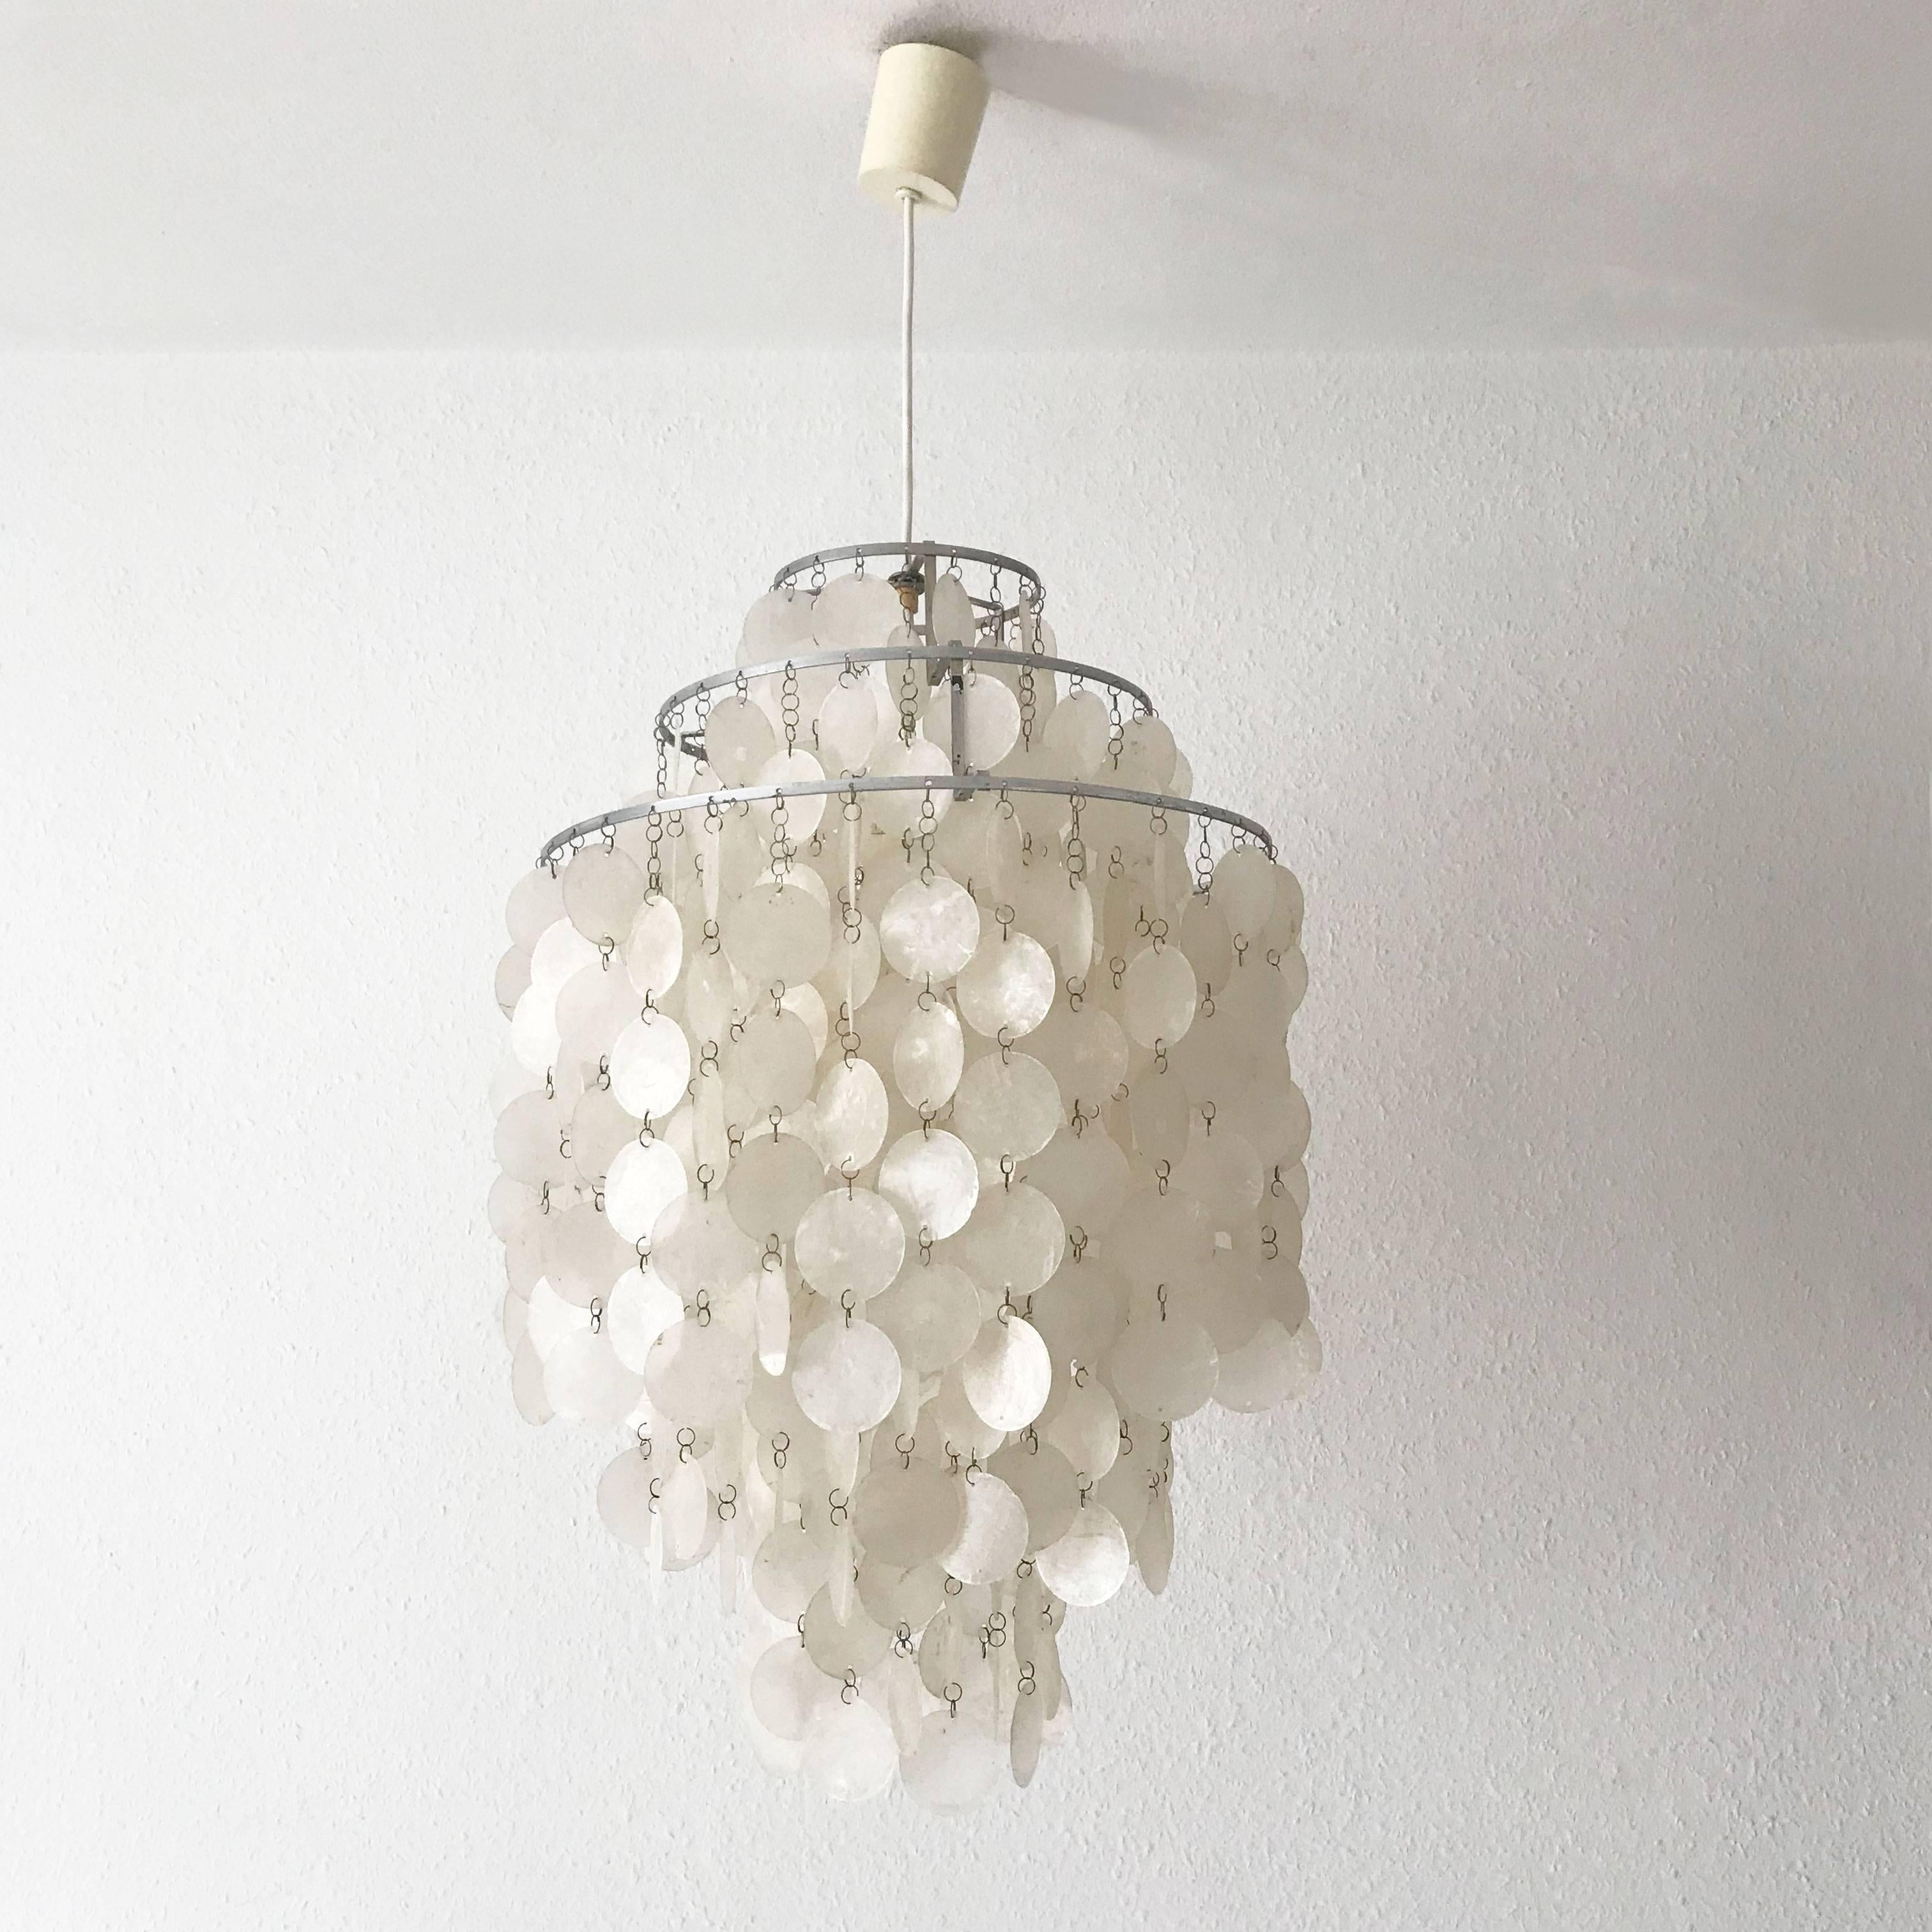 Gorgeous and original Mid-Century Modern pendant lamp or chandelier Fun 1DM. Designed by Verner Panton in 1964. Manufactured by Lüber, Basel, Switzerland in 1960s.
This elegant pendant lamp is executed in numerous sea shell plates (mother of